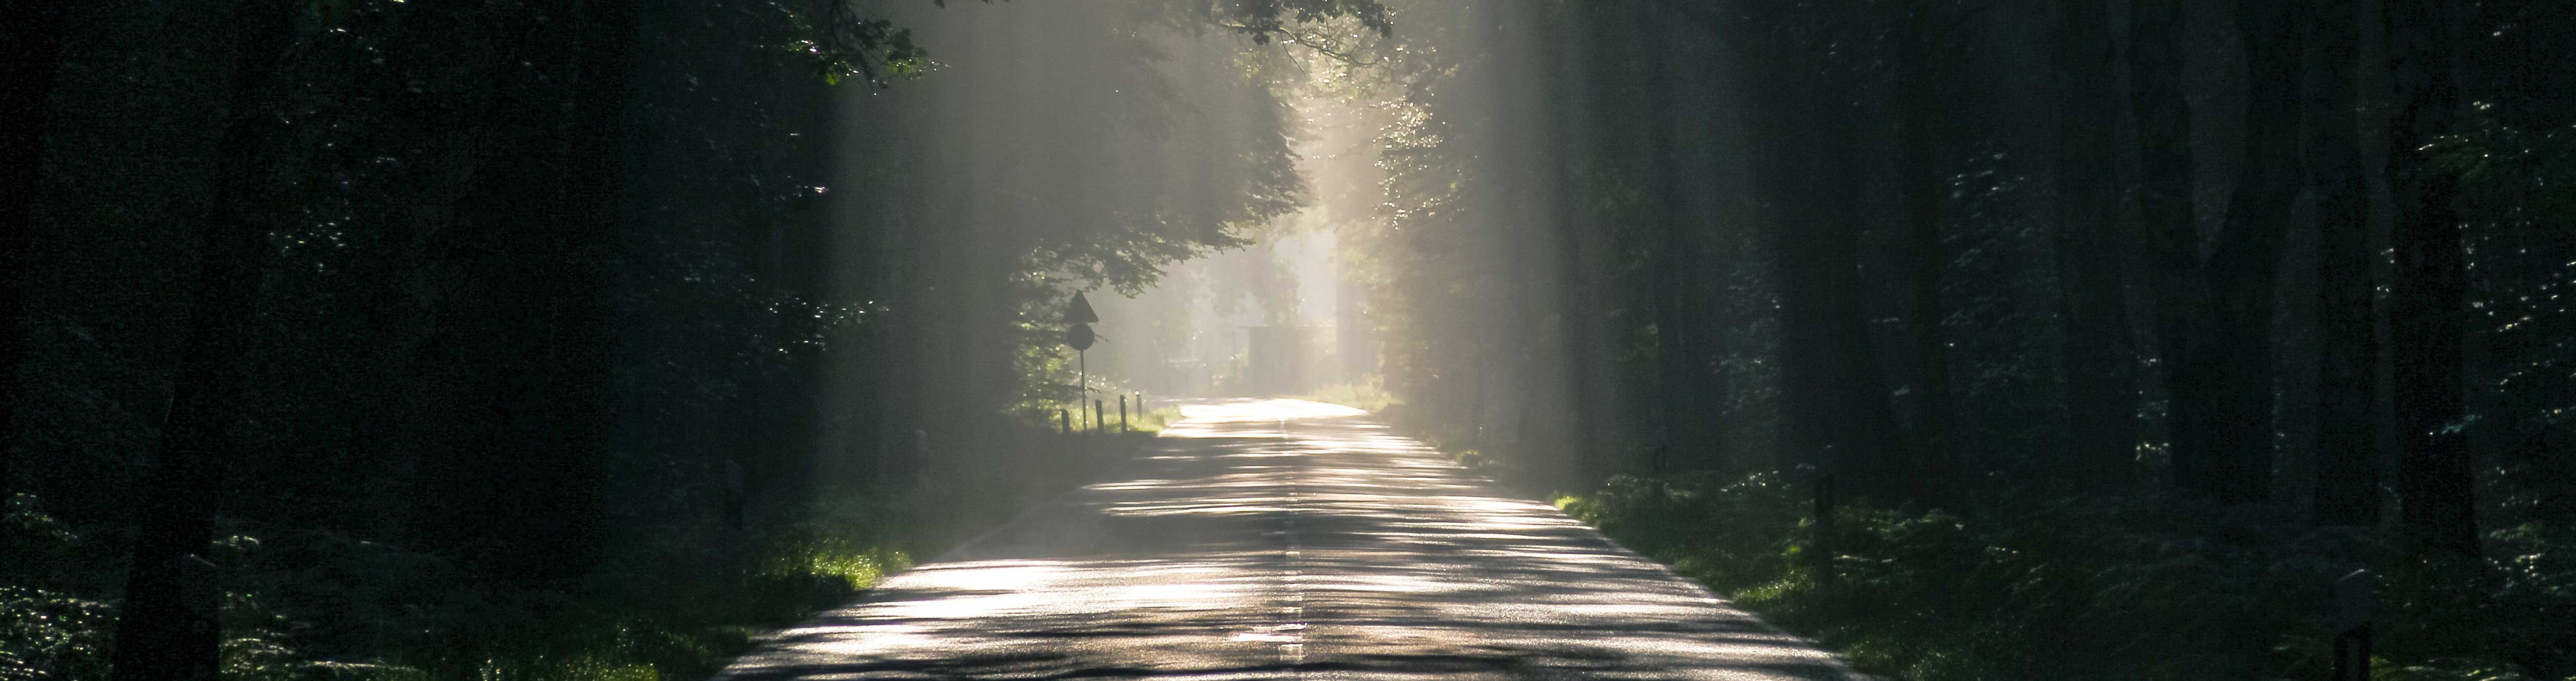 Light through trees on a road